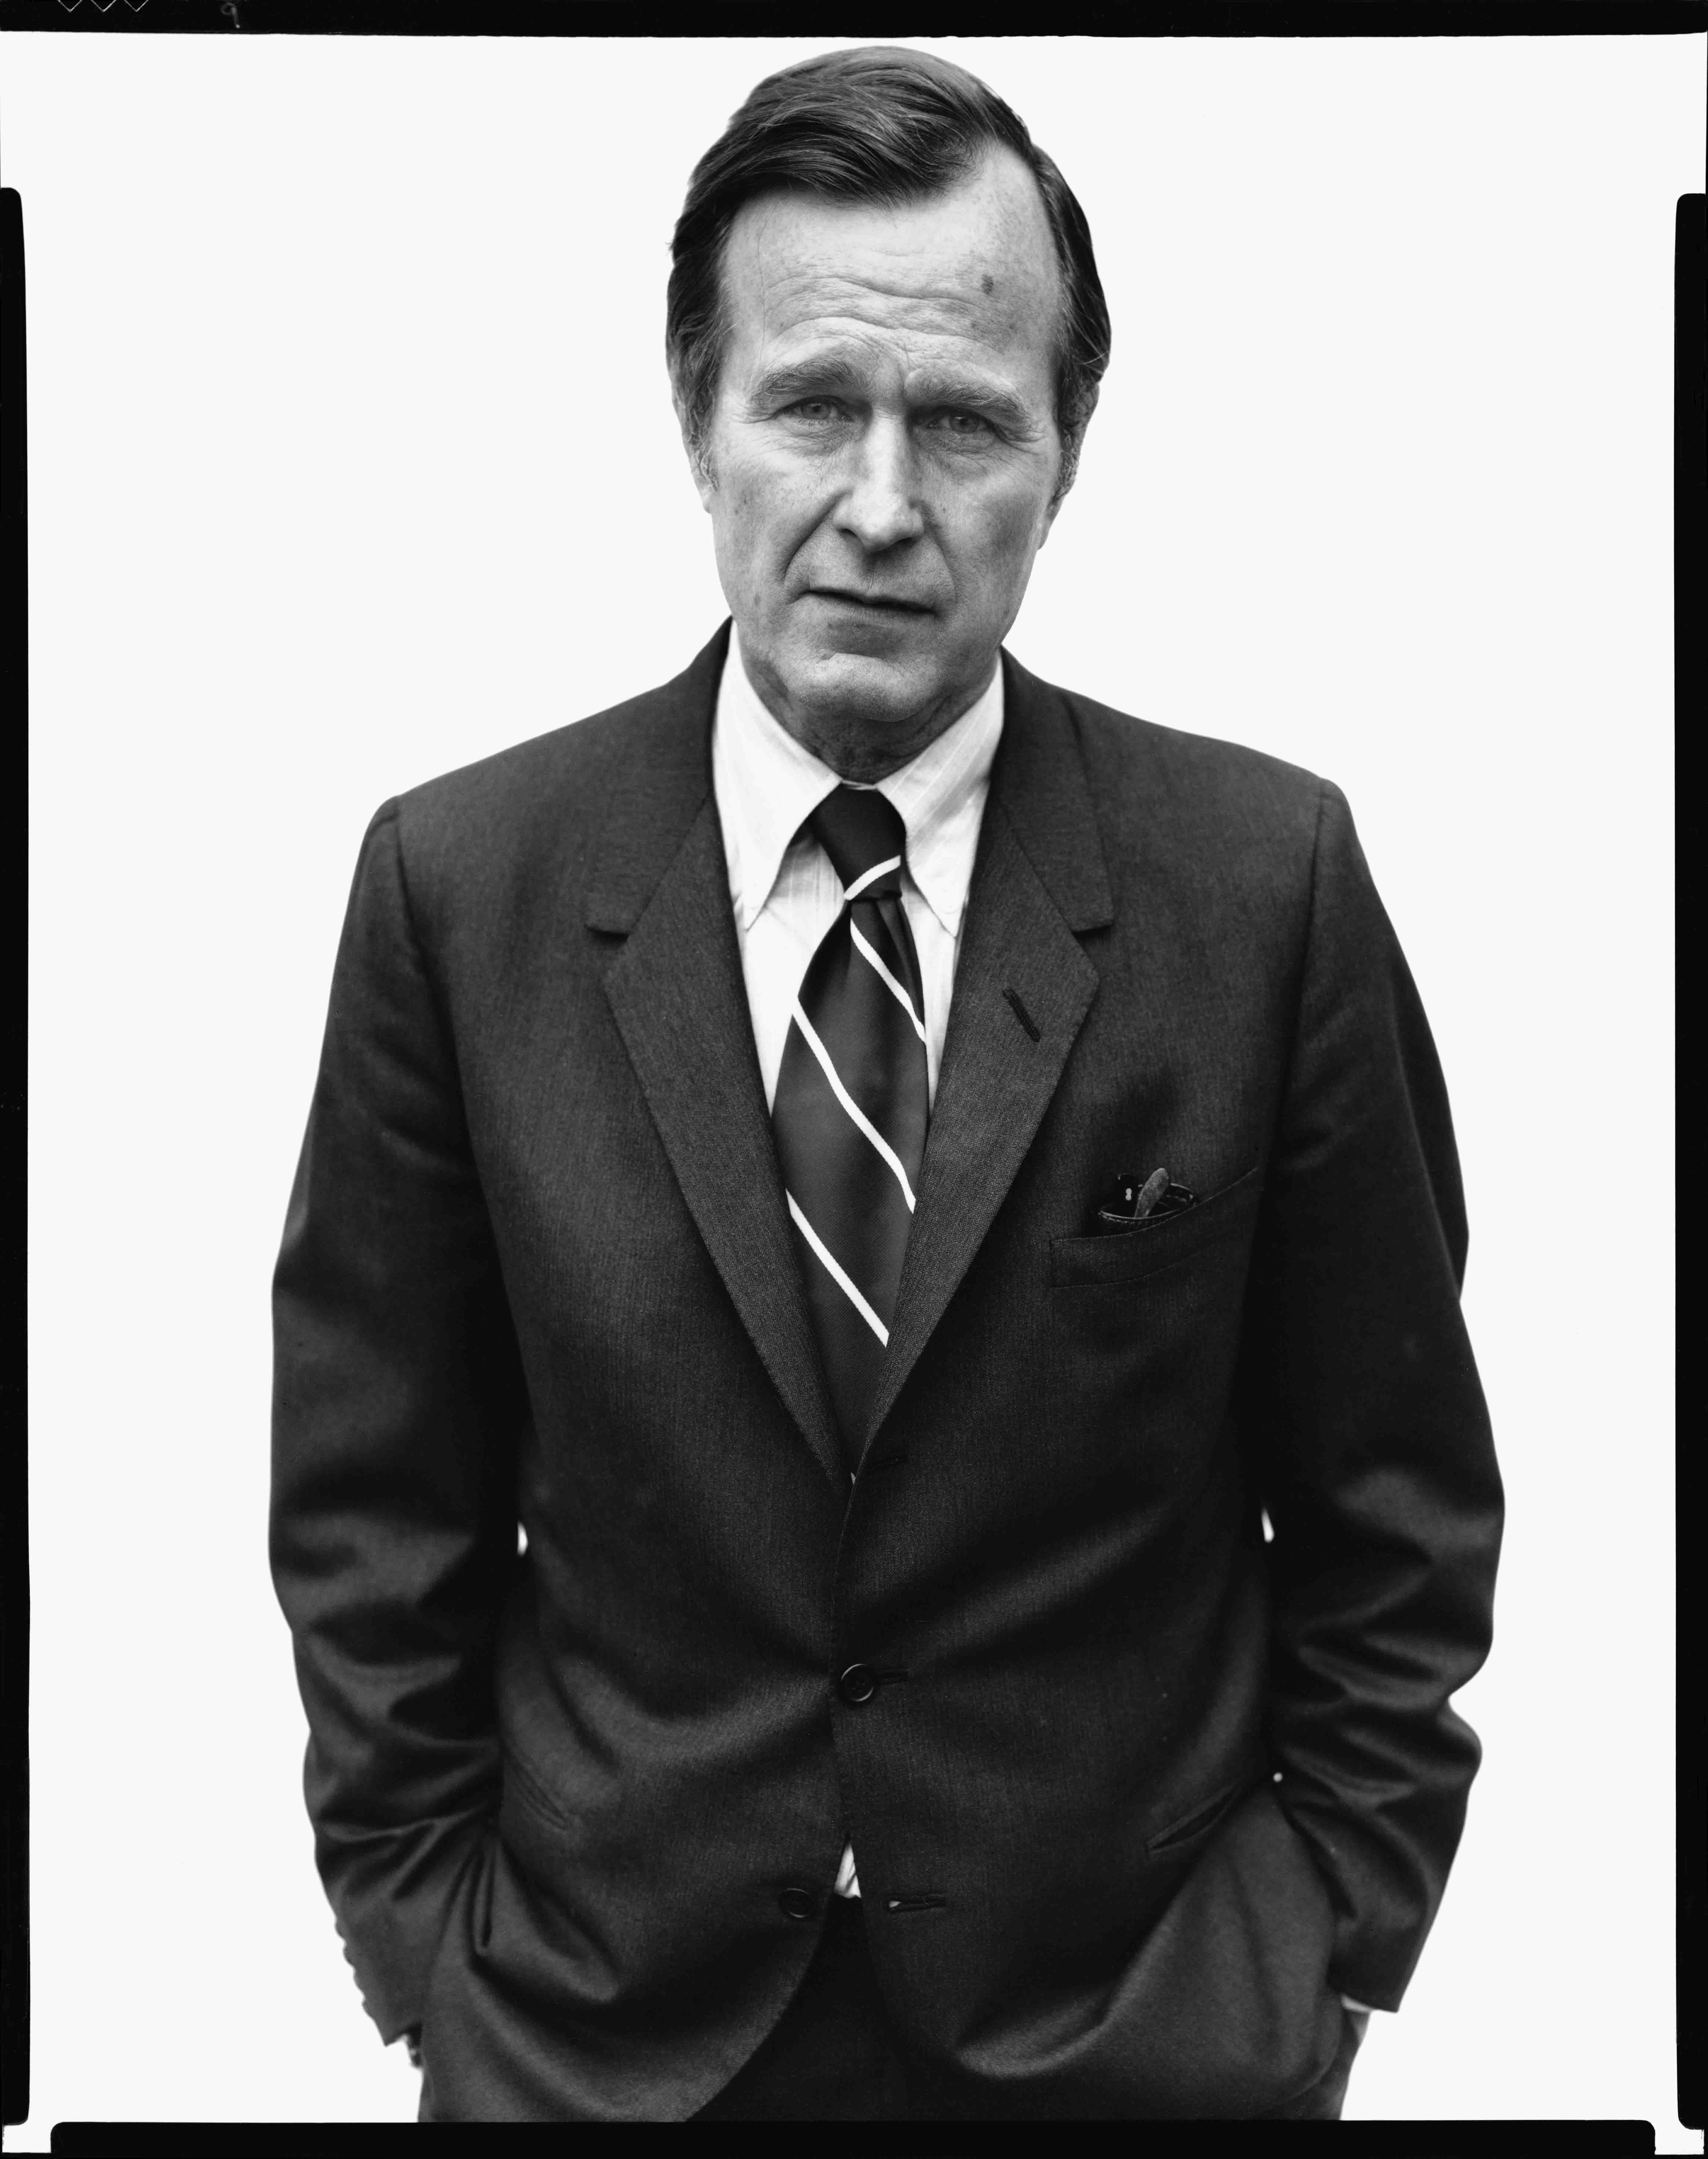 George H.W. Bush, Director, CIA, Langley, Va., March 2, 1976. Photograph by Richard Avedon © The Richard Avedon Foundation. From the Collection of The Israel Museum, Jerusalem. Joint gift of Gagosian Gallery and the American Contemporary Art Foundation, Leonard A. Lauder, President, to American Friends of the Israel Museum